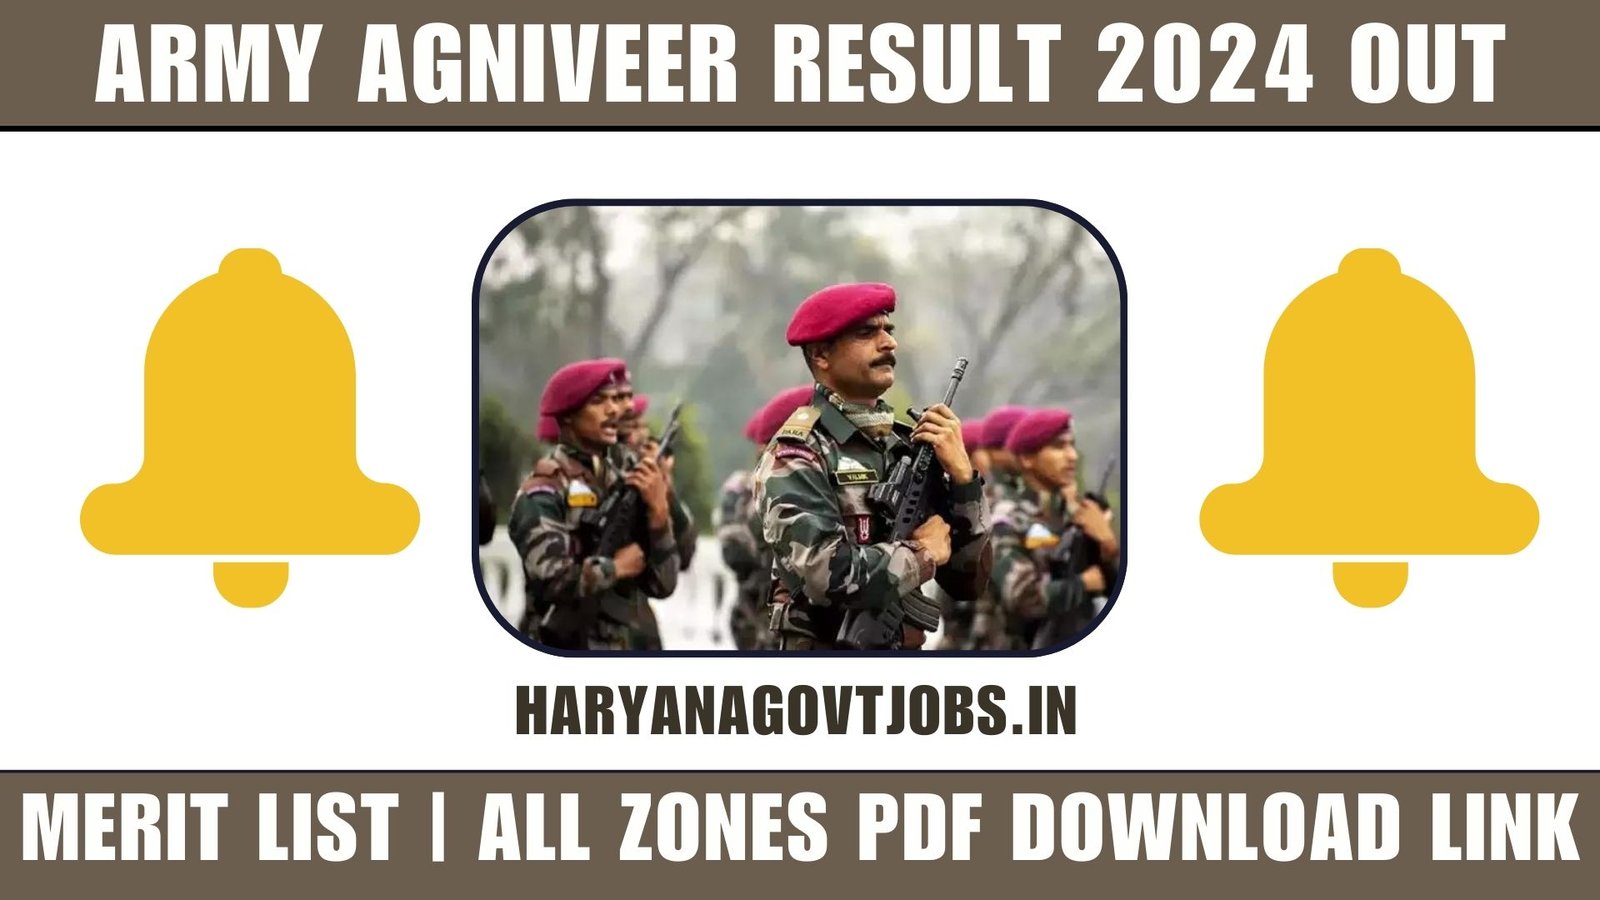 Army Agniveer Result 2024 Overview